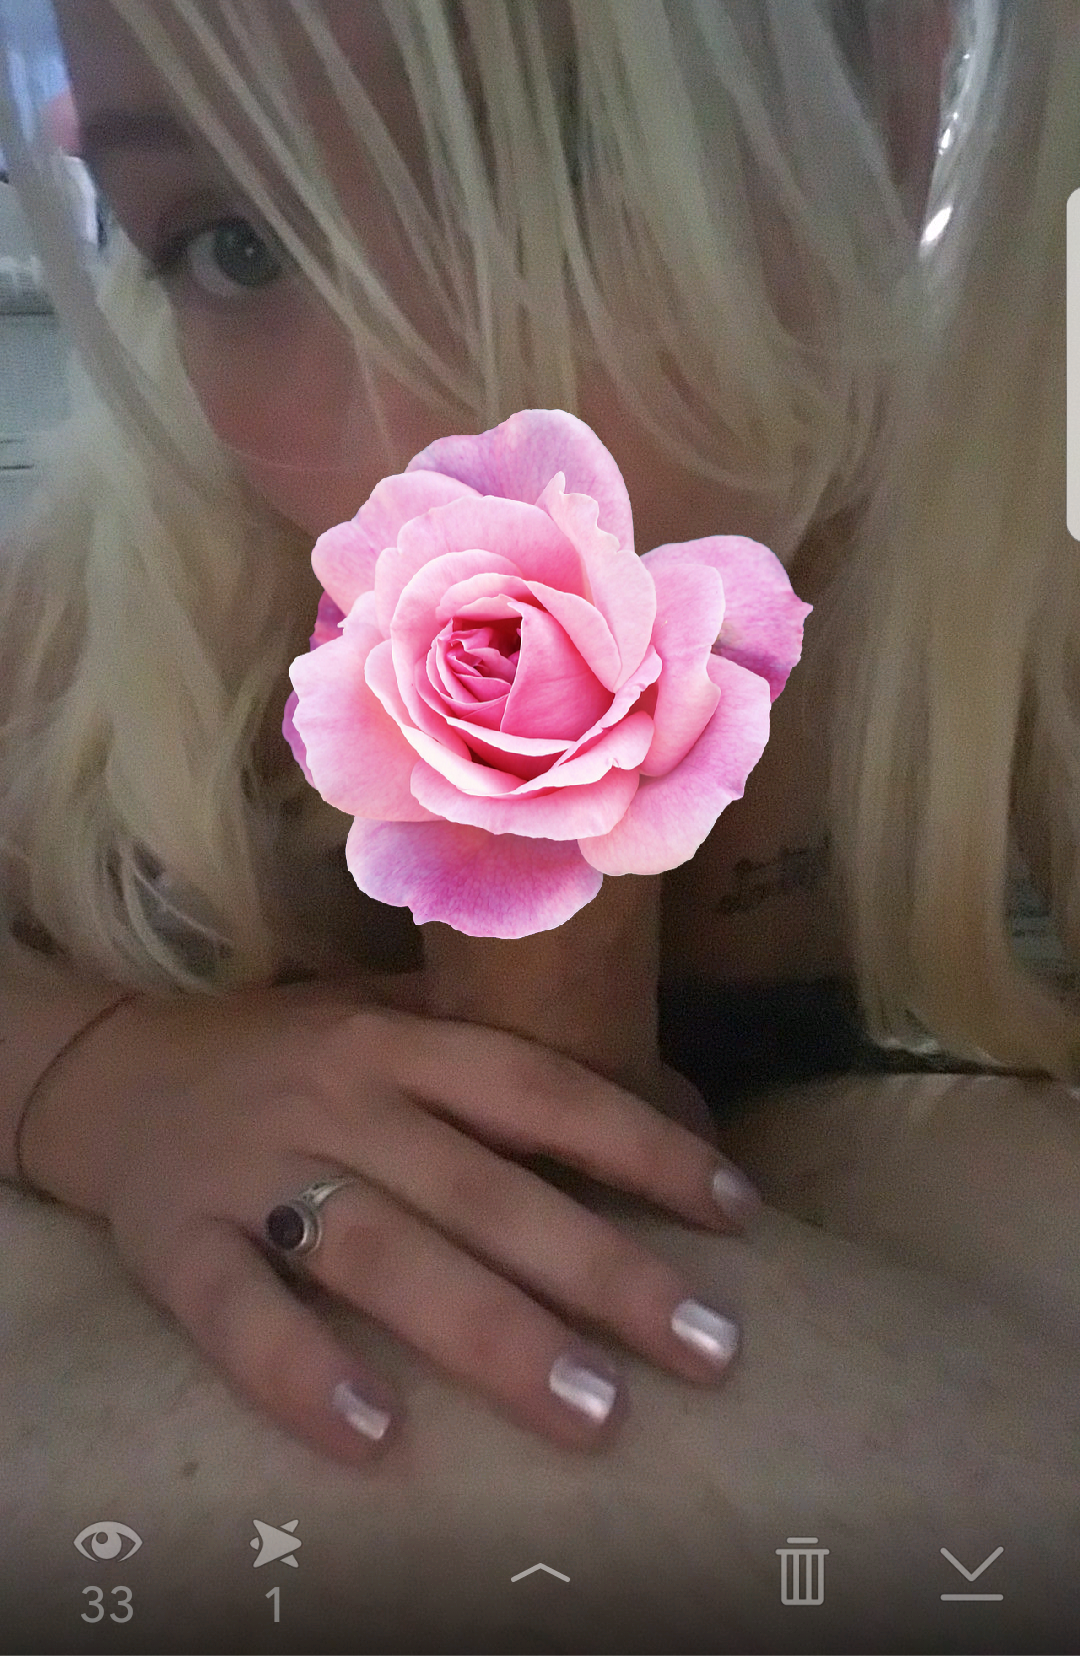 satanslittleangelbaby: Buy my snapchat! Only 20$ for lifetime snapchat access (daily